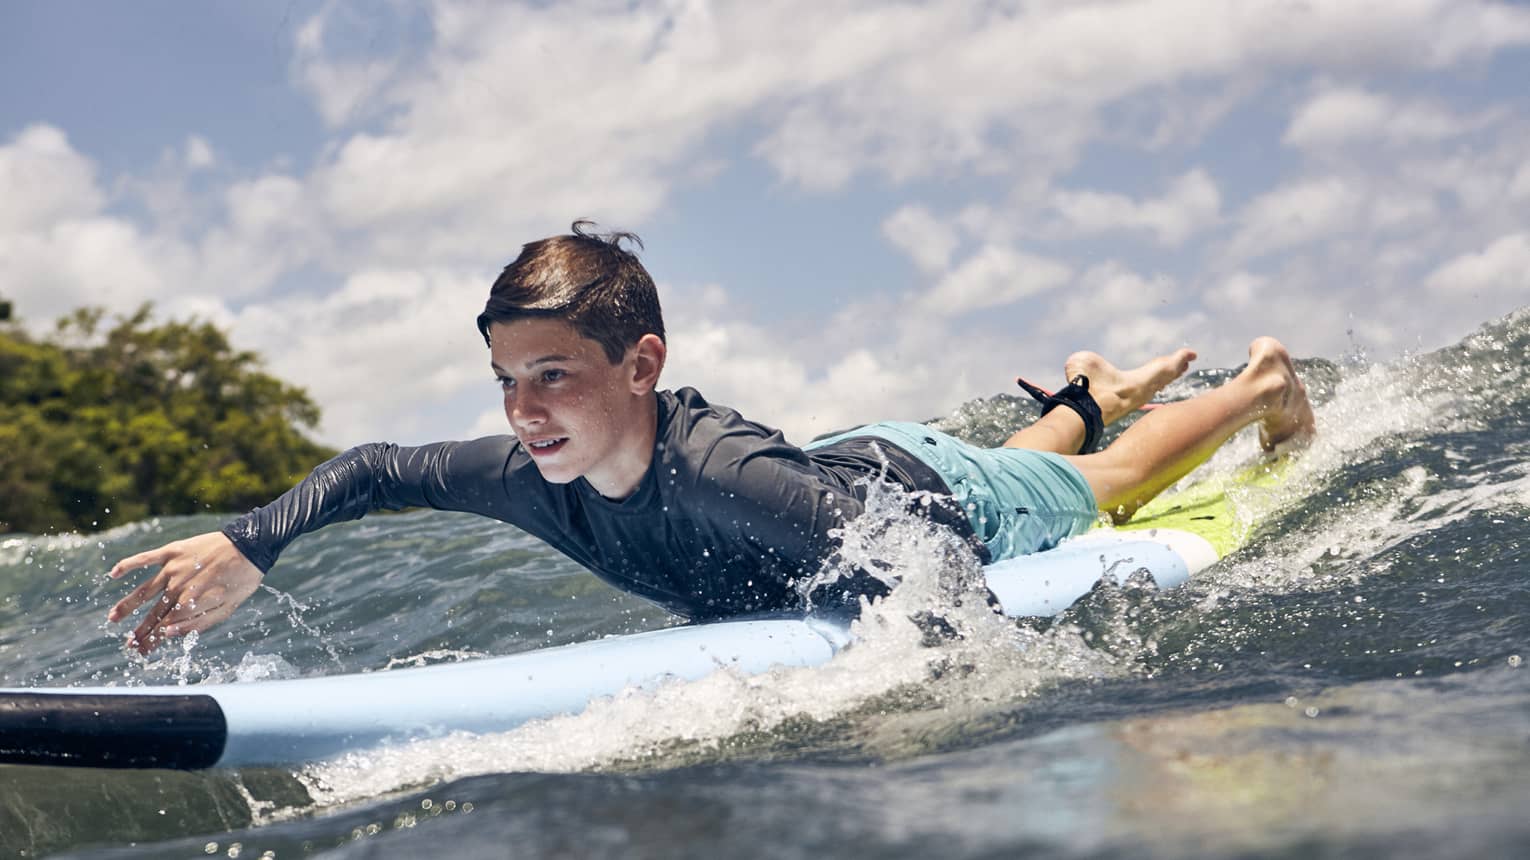 Close-up of a child paddling a surfboard over a wave in the glistening sea, water splashing around the sides of the board.